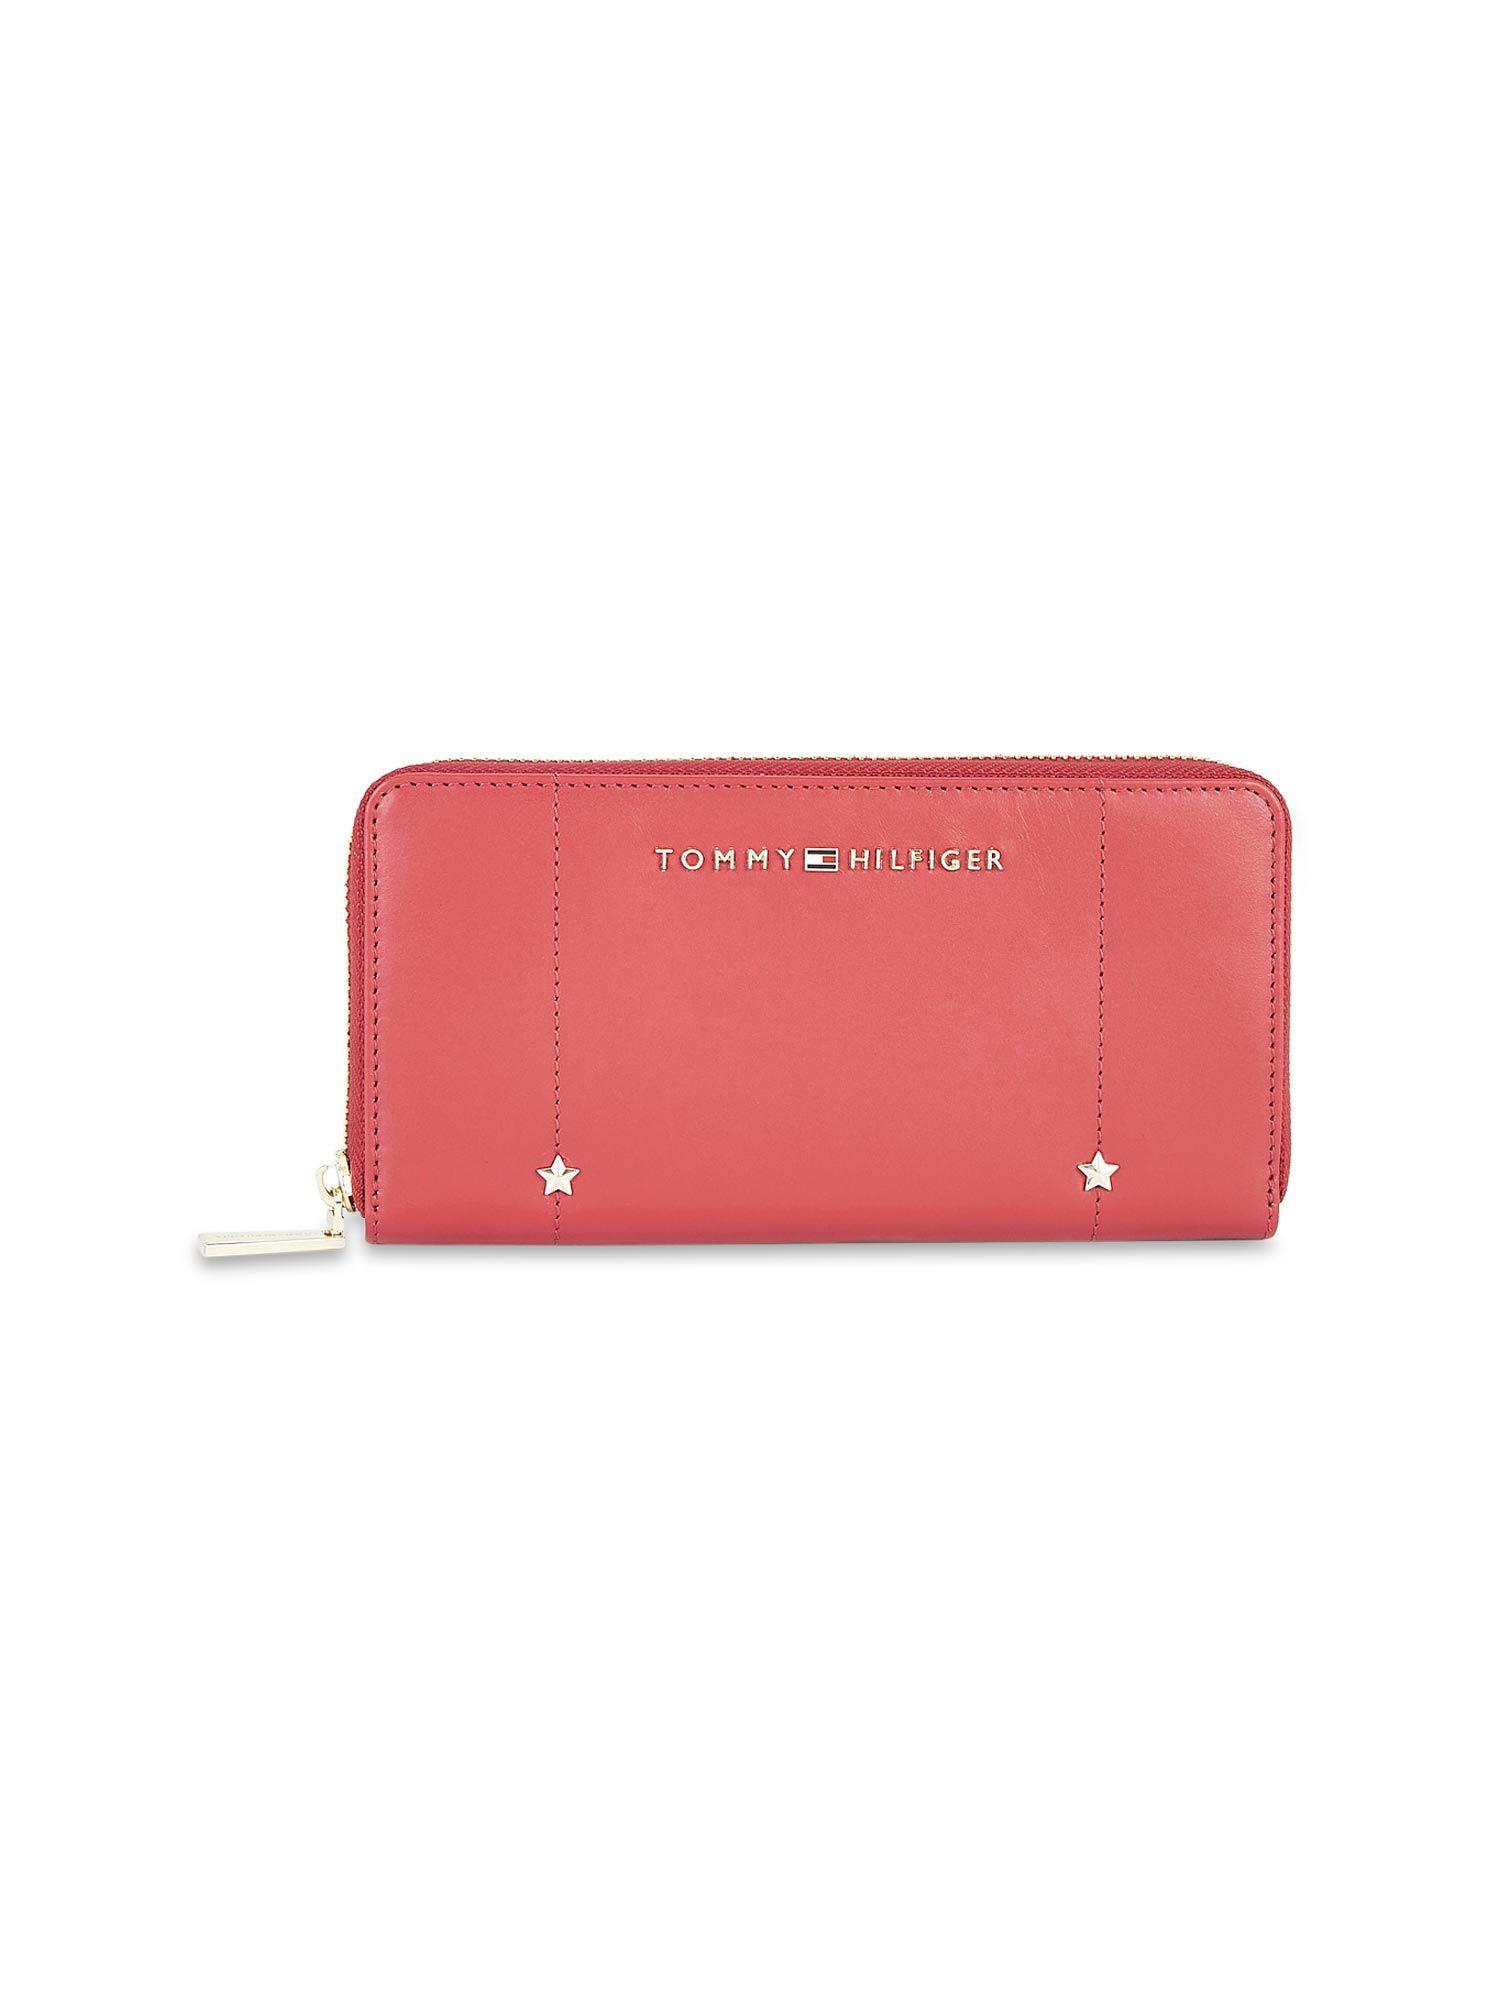 kyro womens wallet solid red (s)